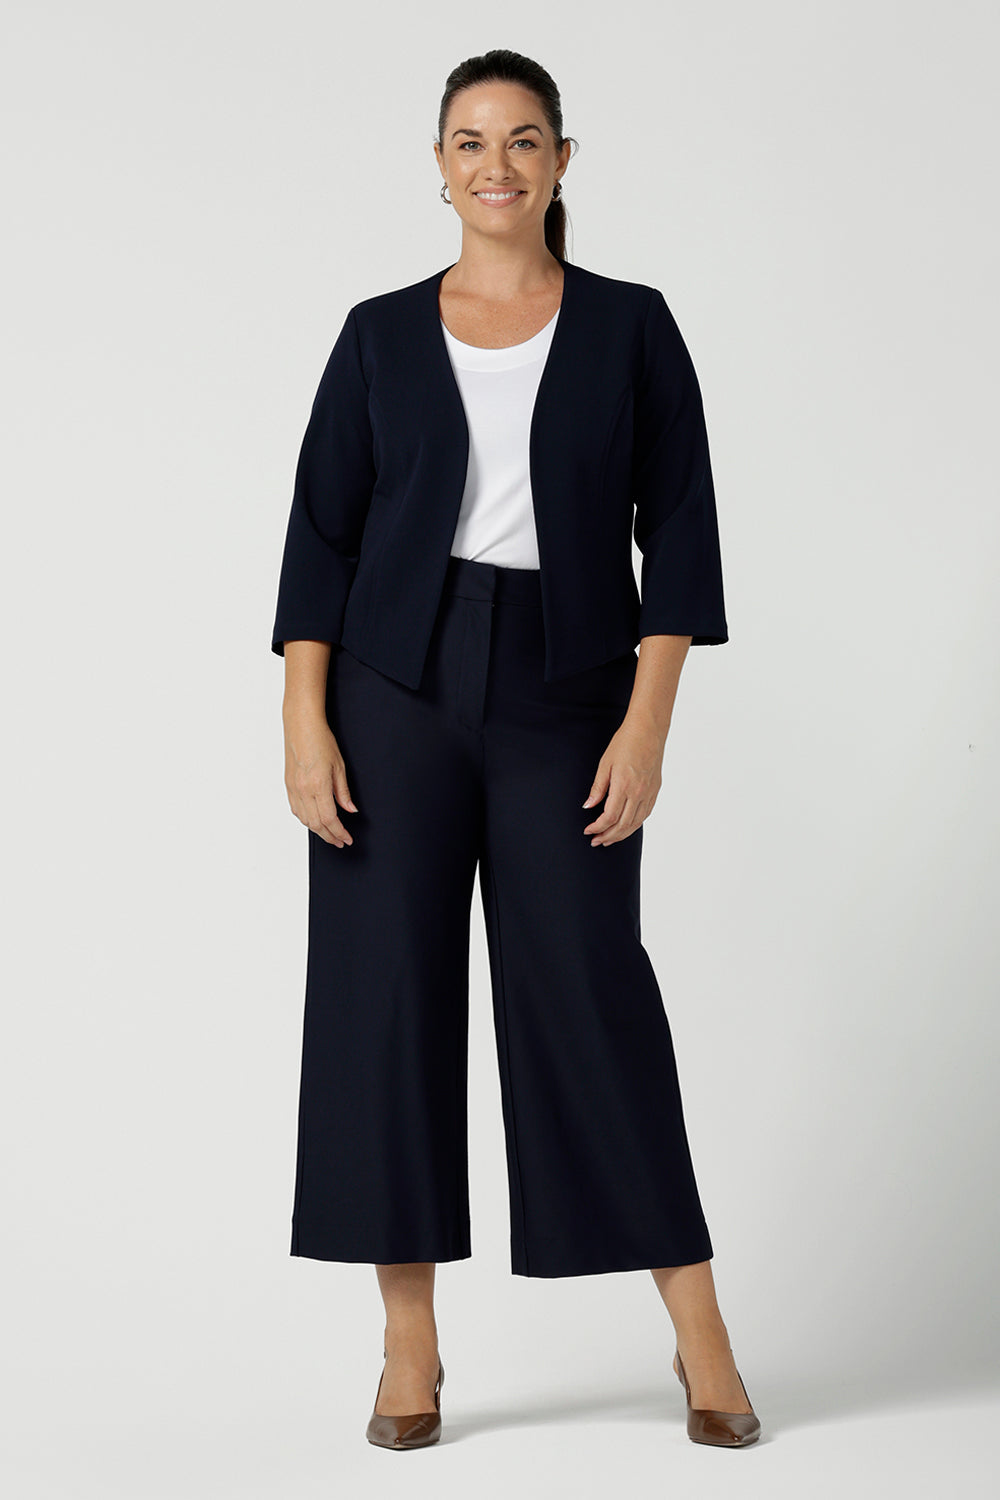 Yael Pant in Navy Ponte. Tailored high waist pants with pockets and front zip. Cropped culotte length and styled back with white bamboo top. Made in Australia for women size 8 - 24. Styled back with Navy blazer jacekt.